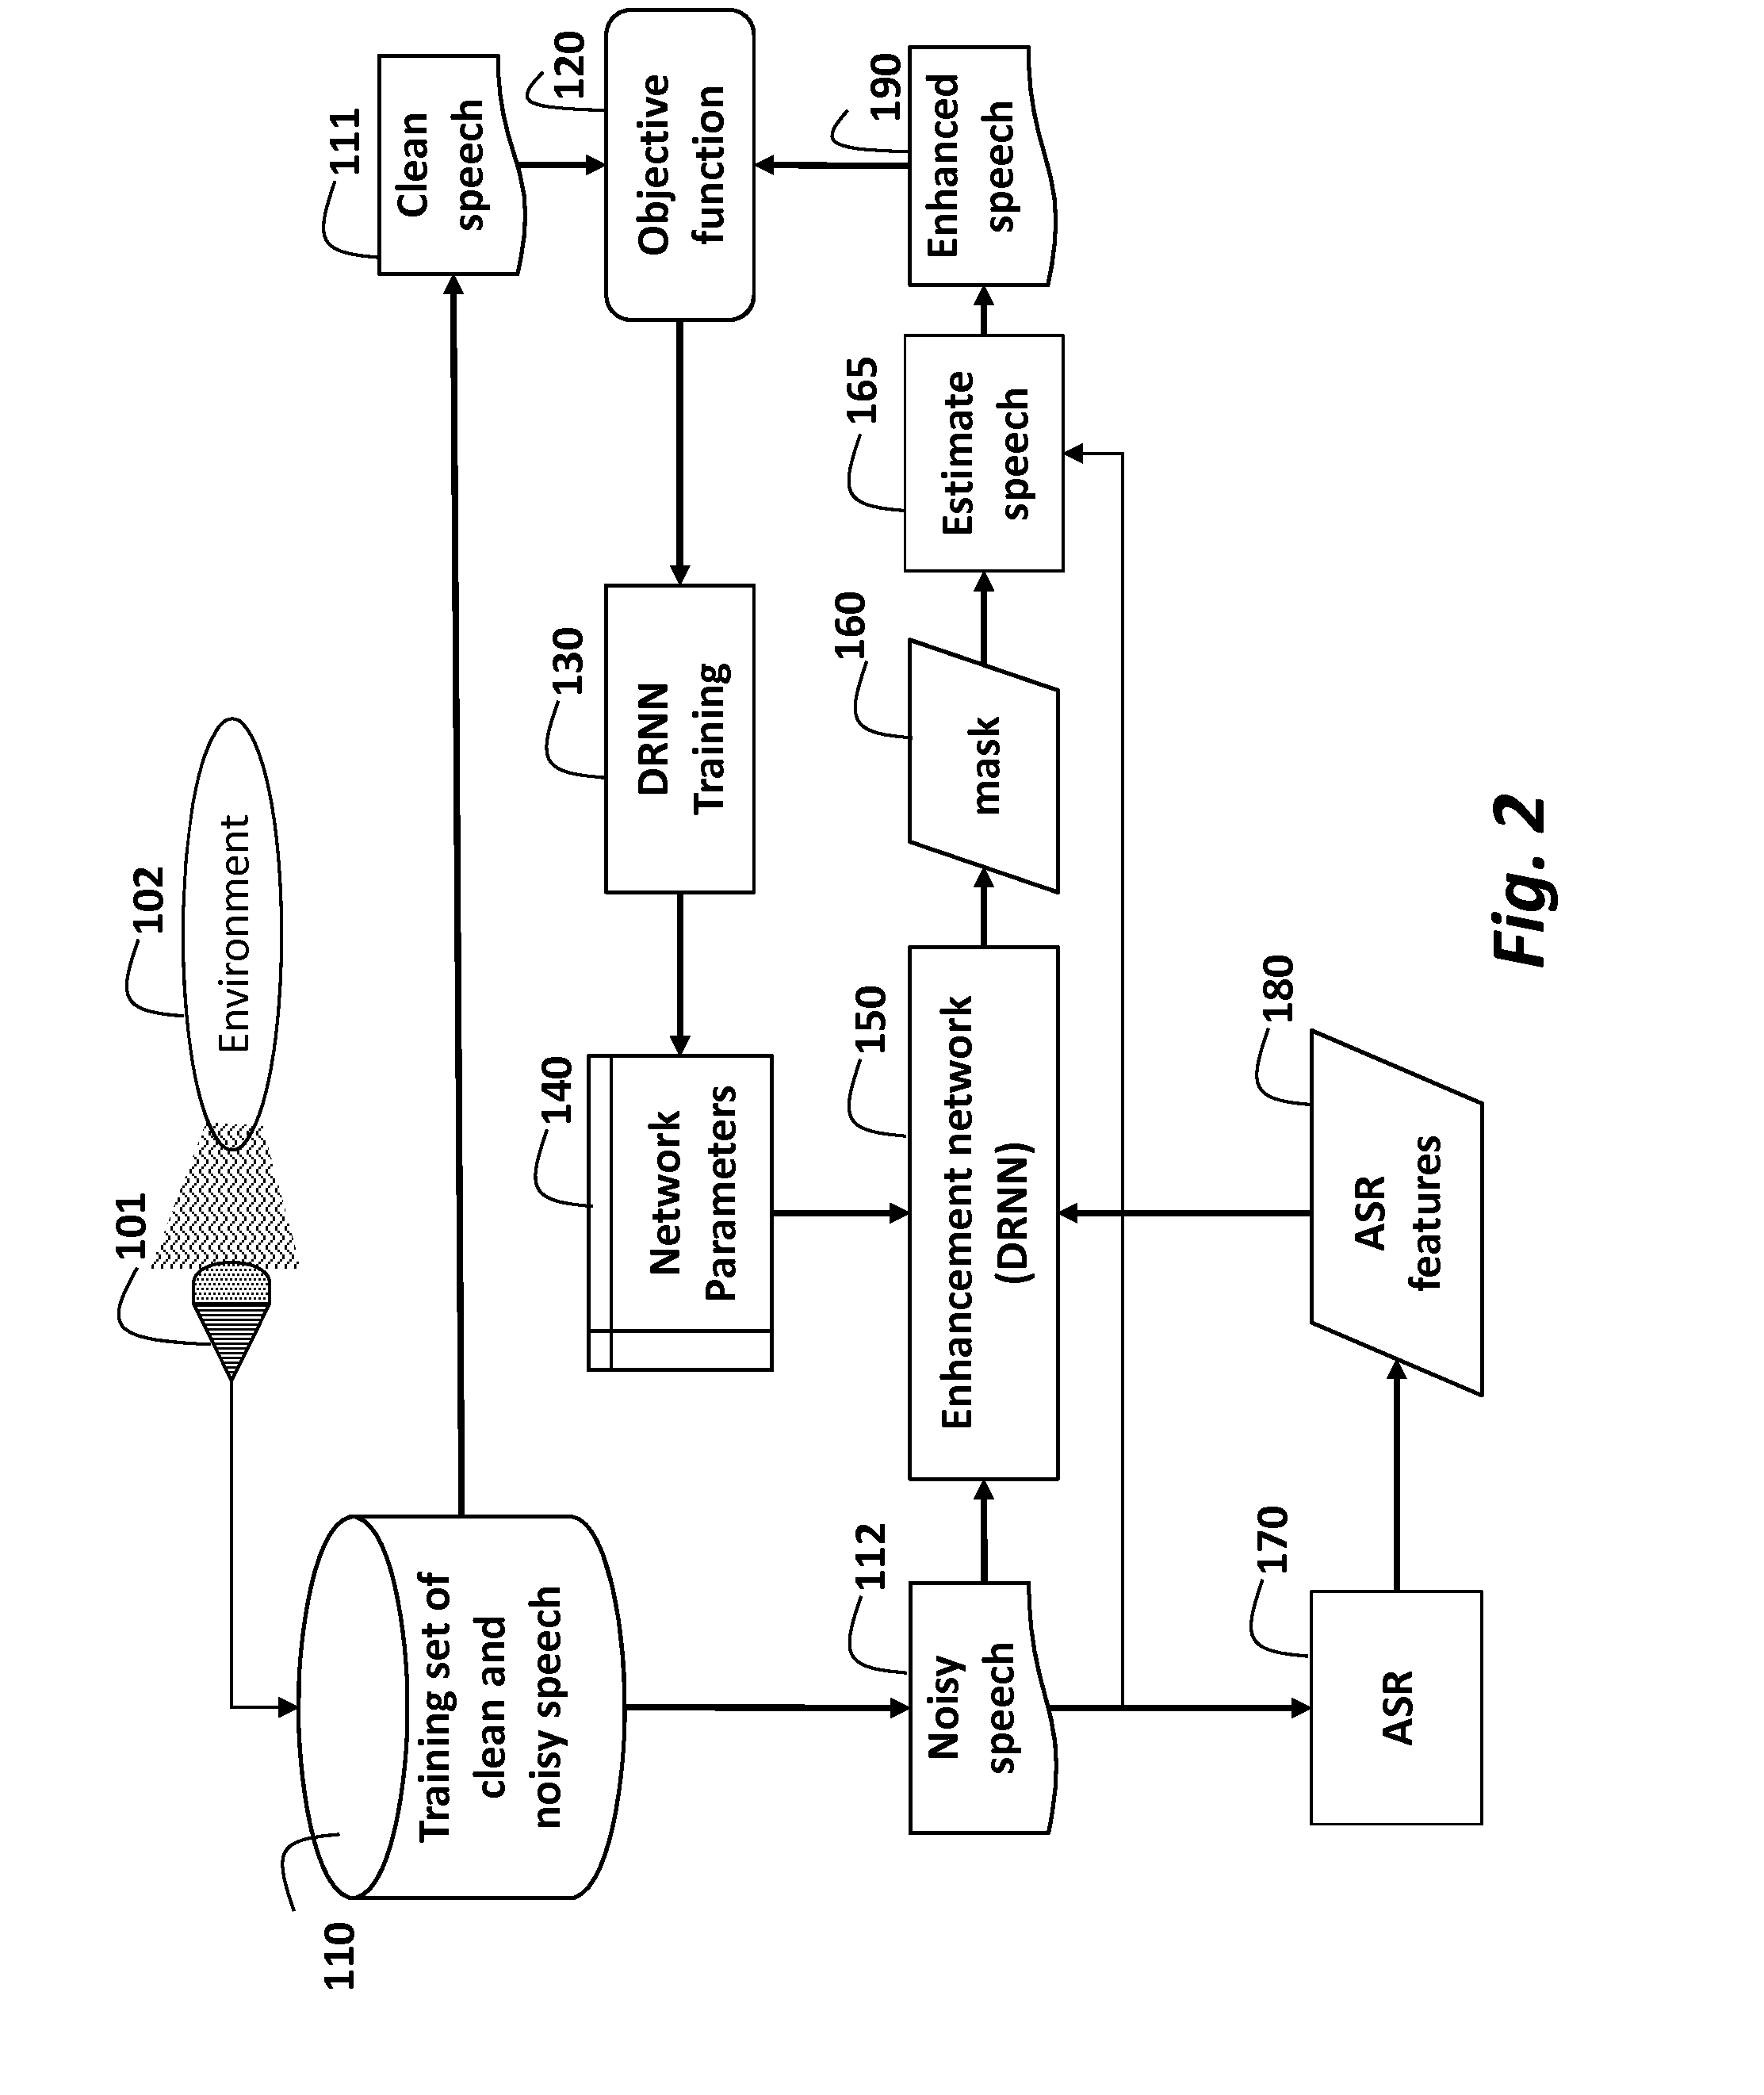 Method for Enhancing Noisy Speech using Features from an Automatic Speech Recognition System